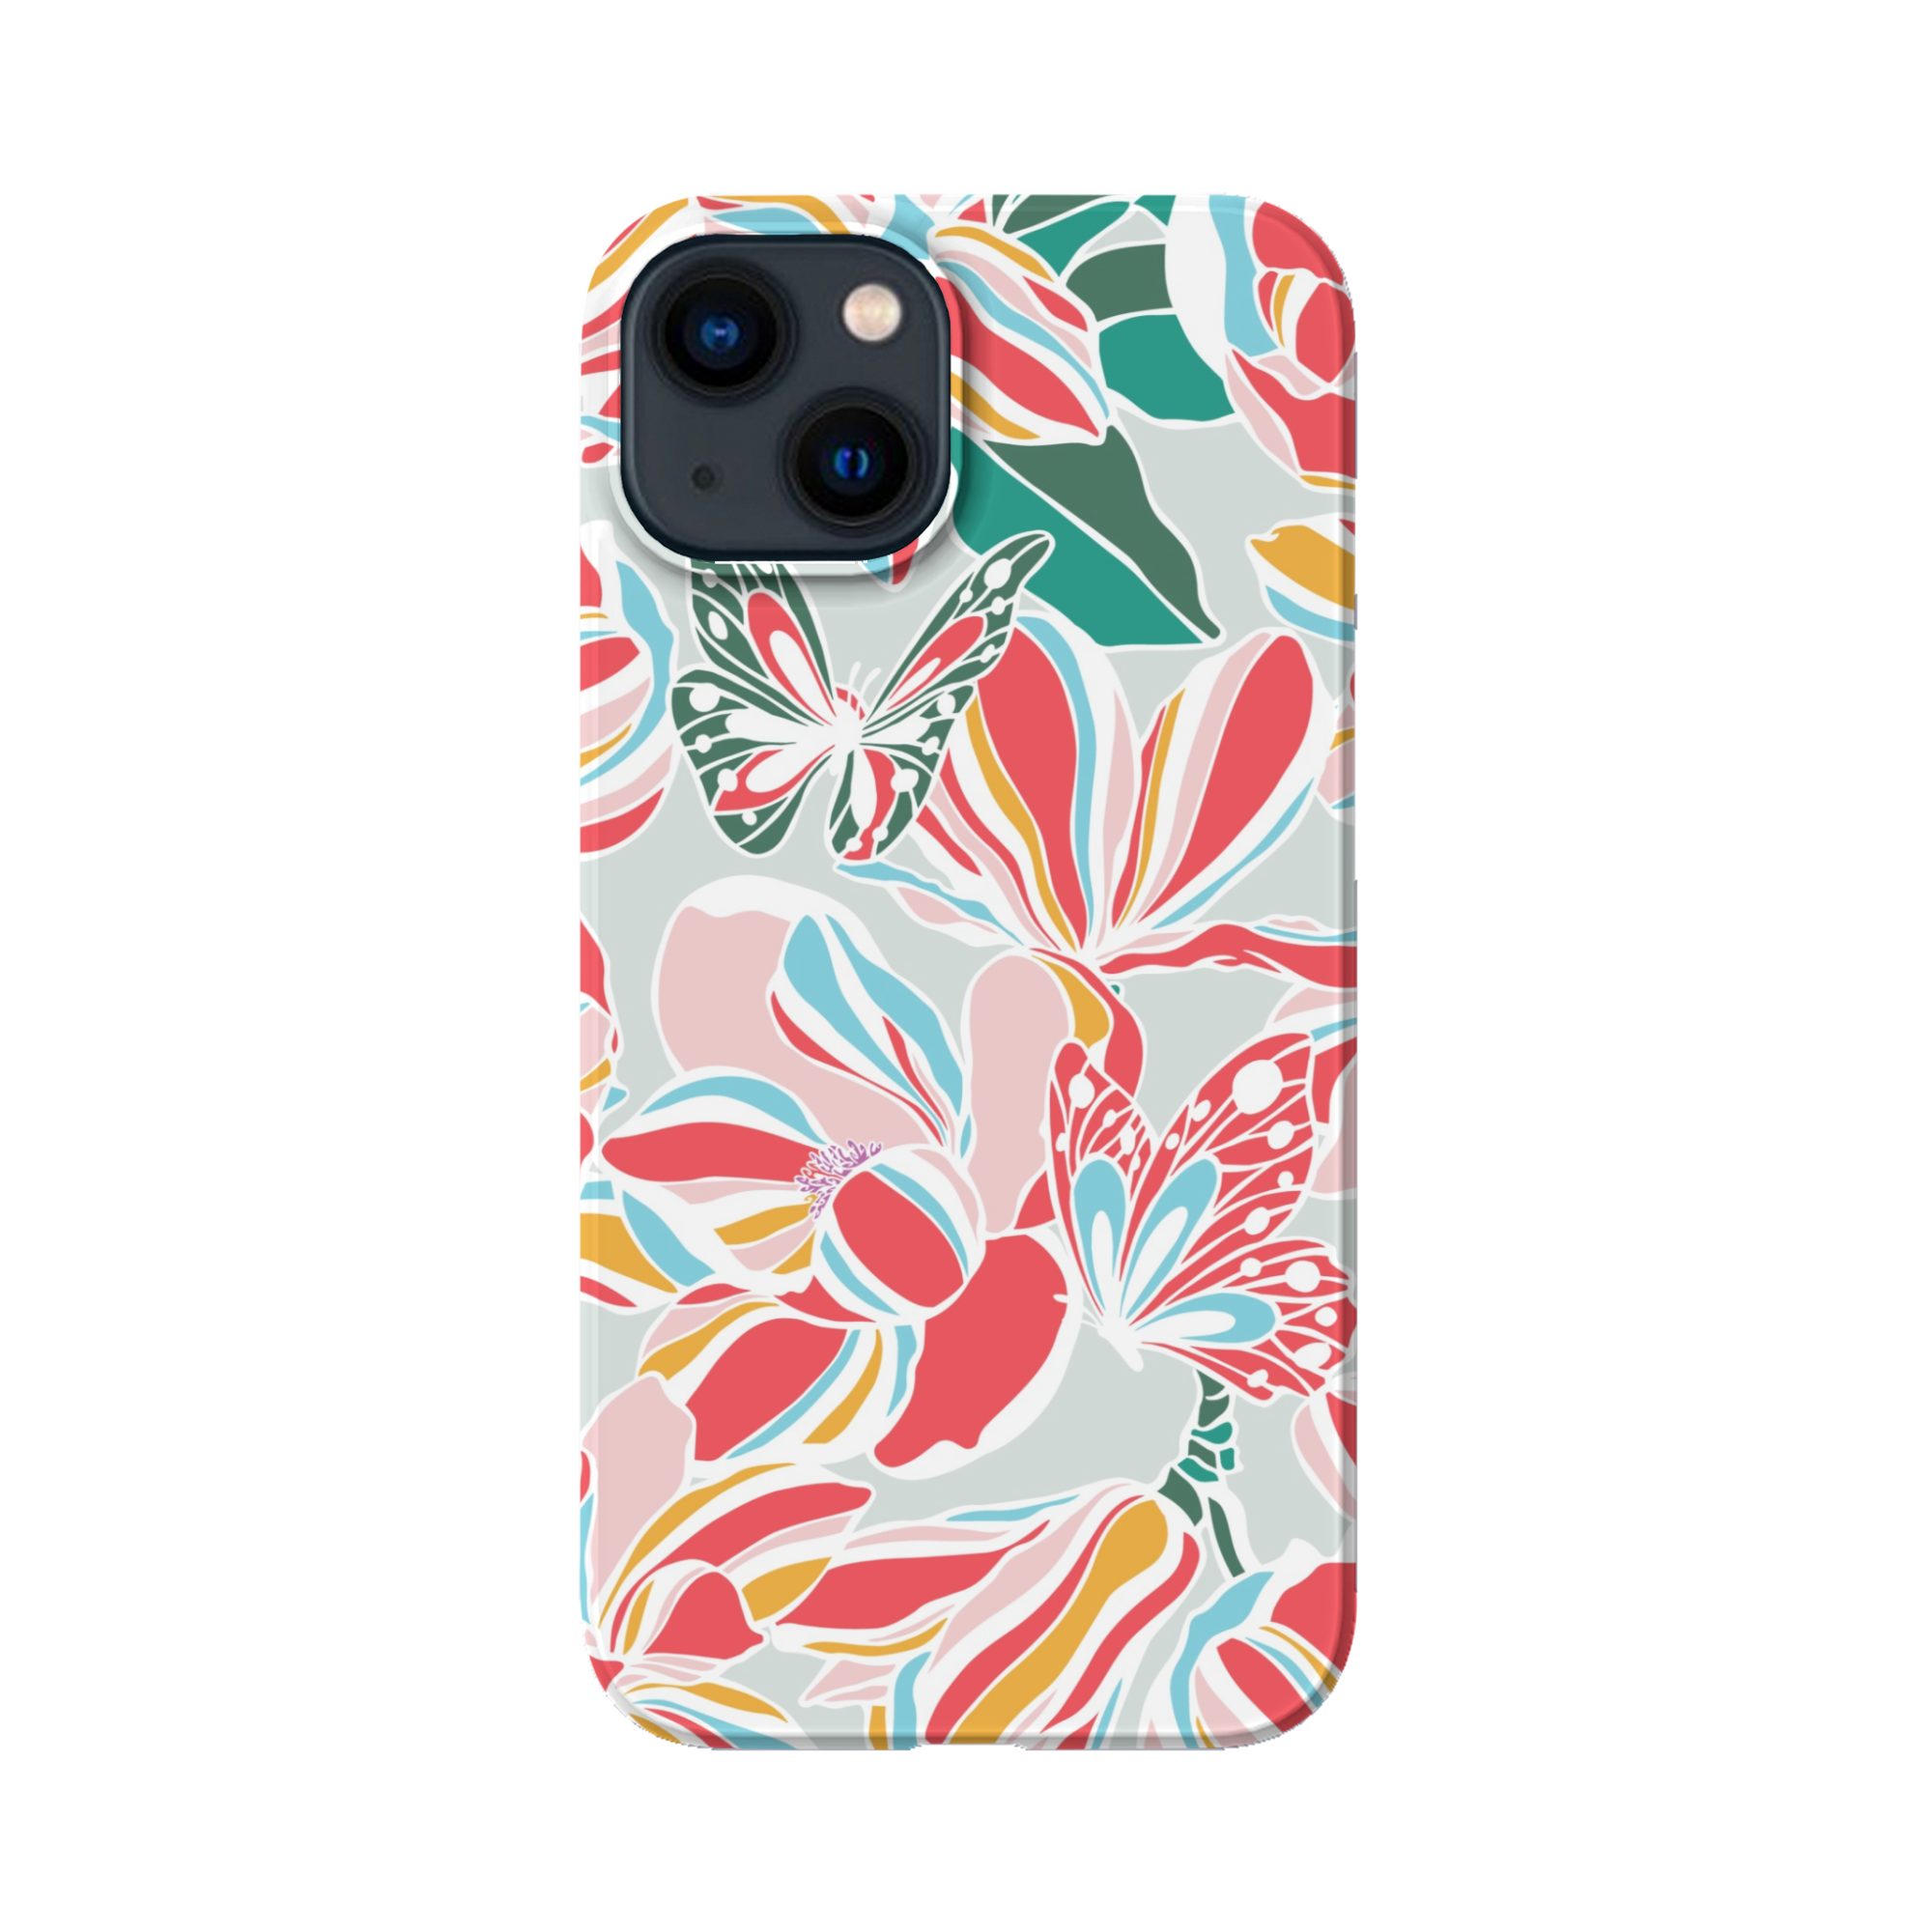 THE MAGNOLIAS AND BUTTERFLIES, mobile phone case